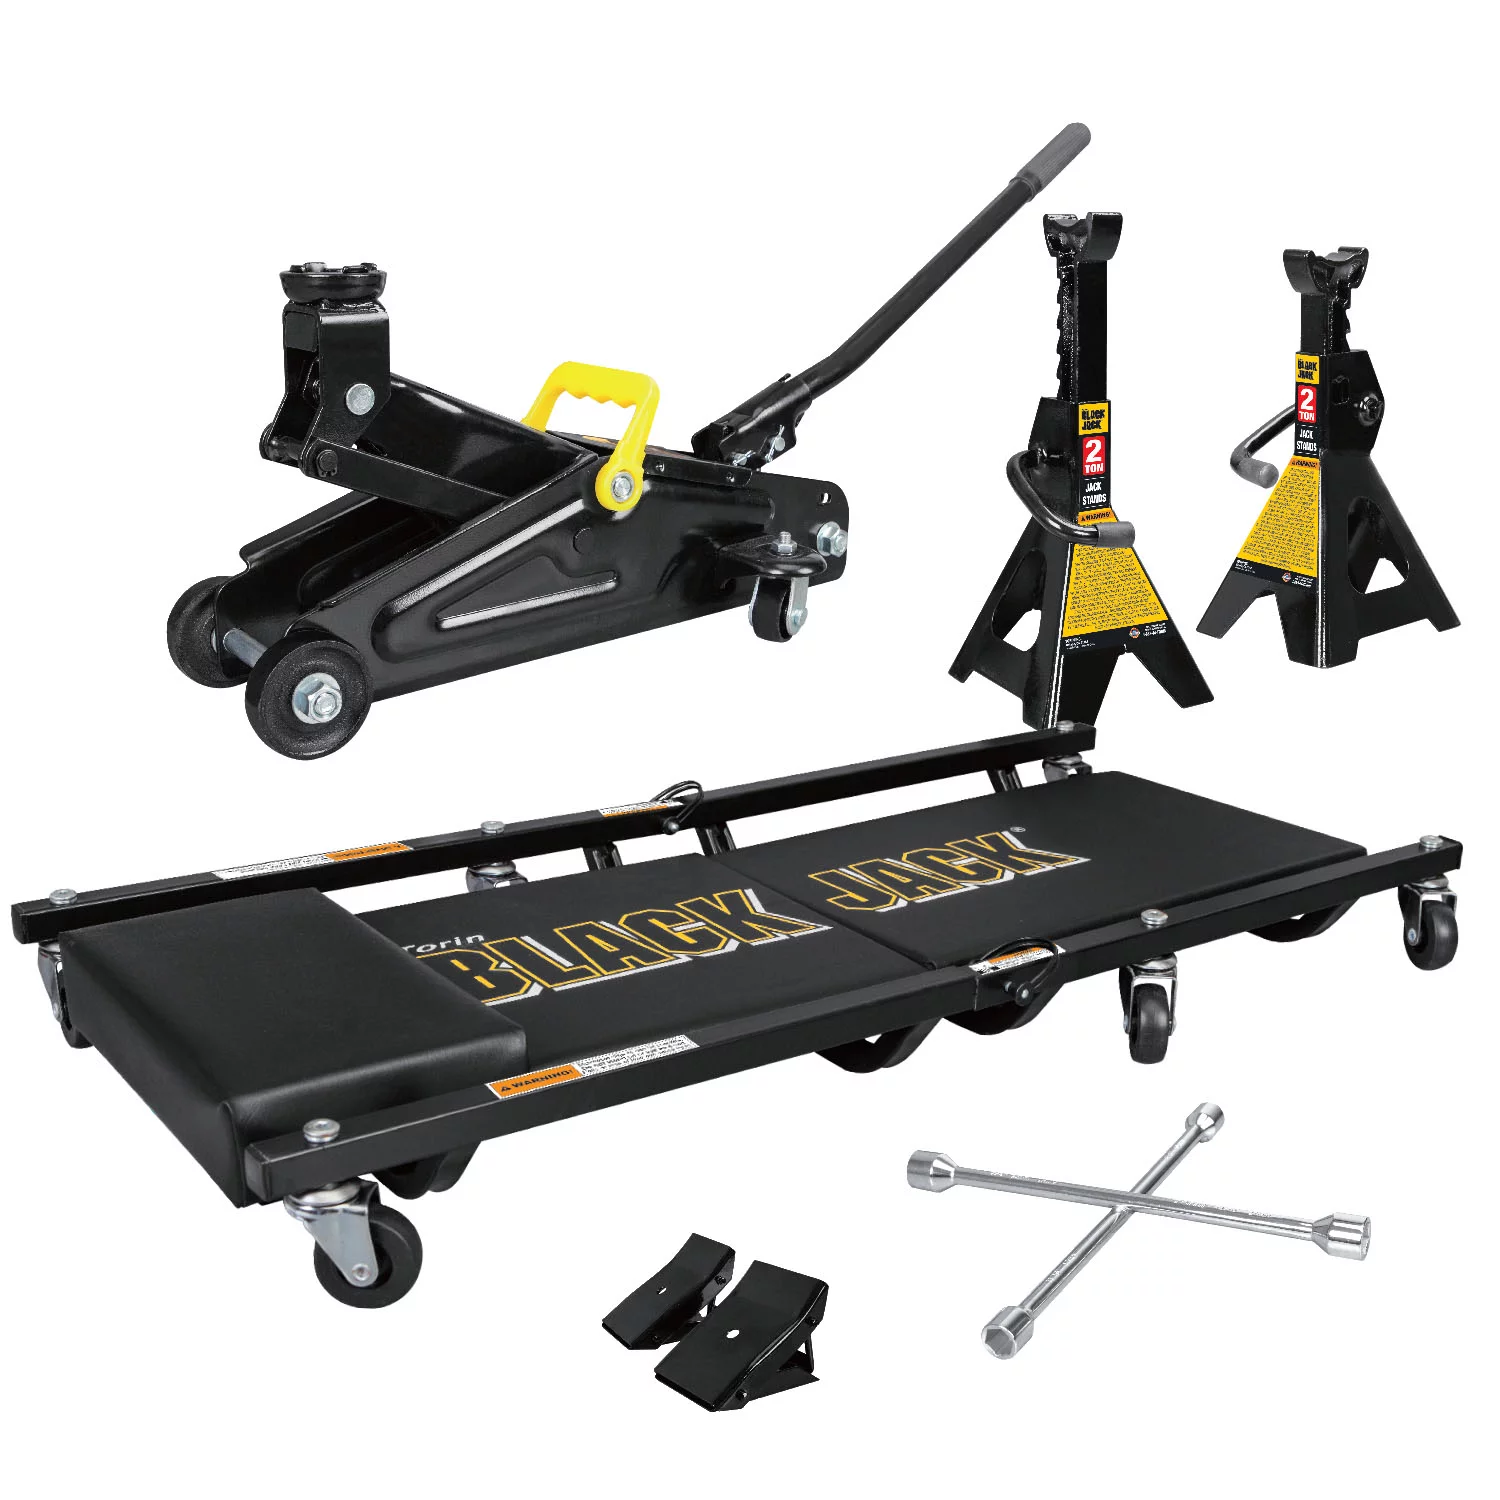 Torin Black Jack T82206W 2 Ton Vehicle Lift Combo Kit for Any Type:Trolley Jack&Creeper Seat&Jack Stands